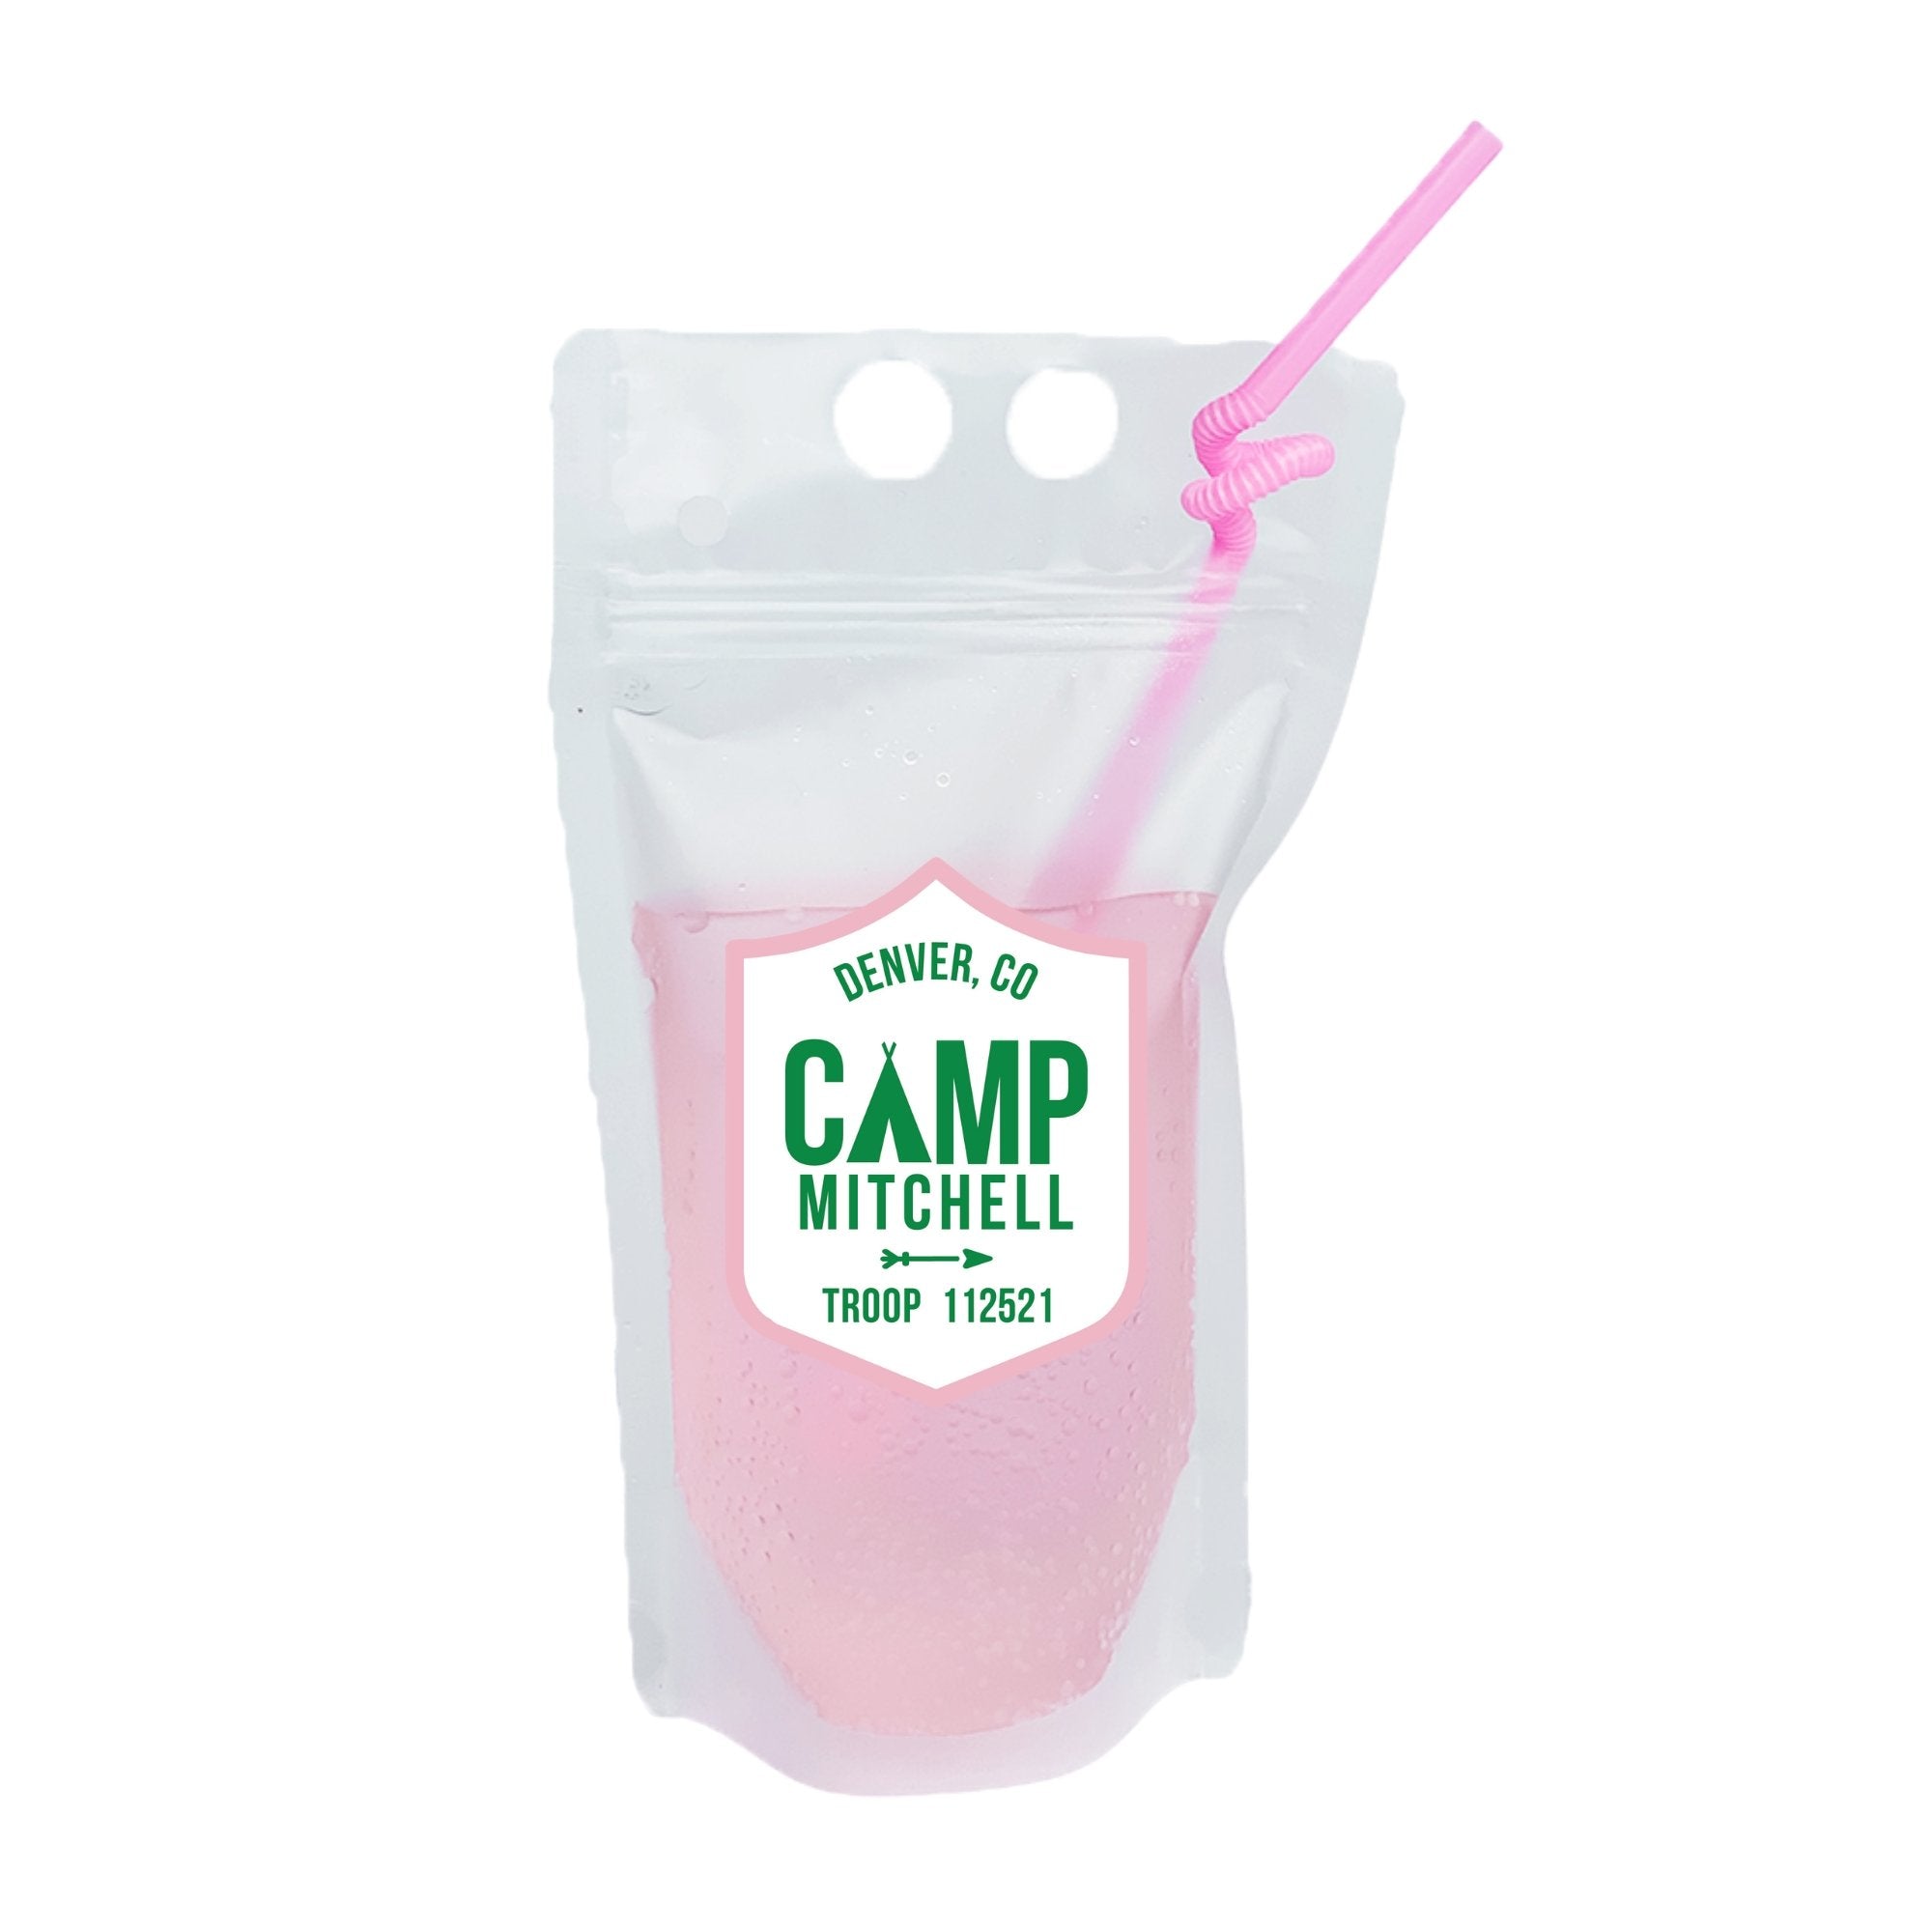 A party pouch is customized with a green and pink camp logo